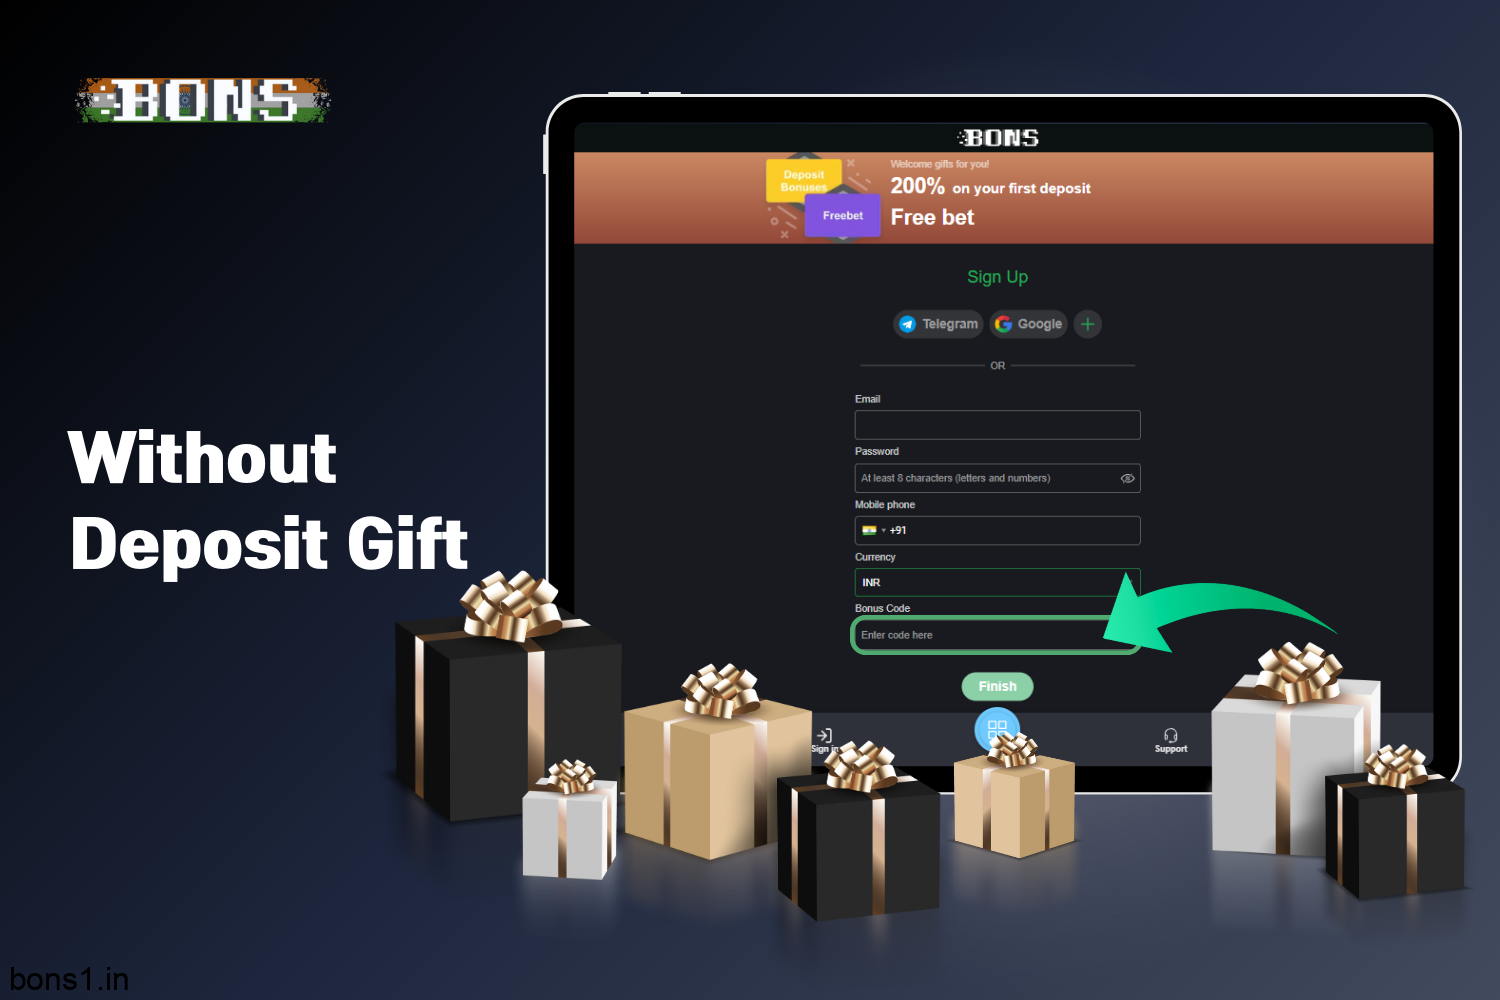 Bons Casino has several no deposit gifts for users from India